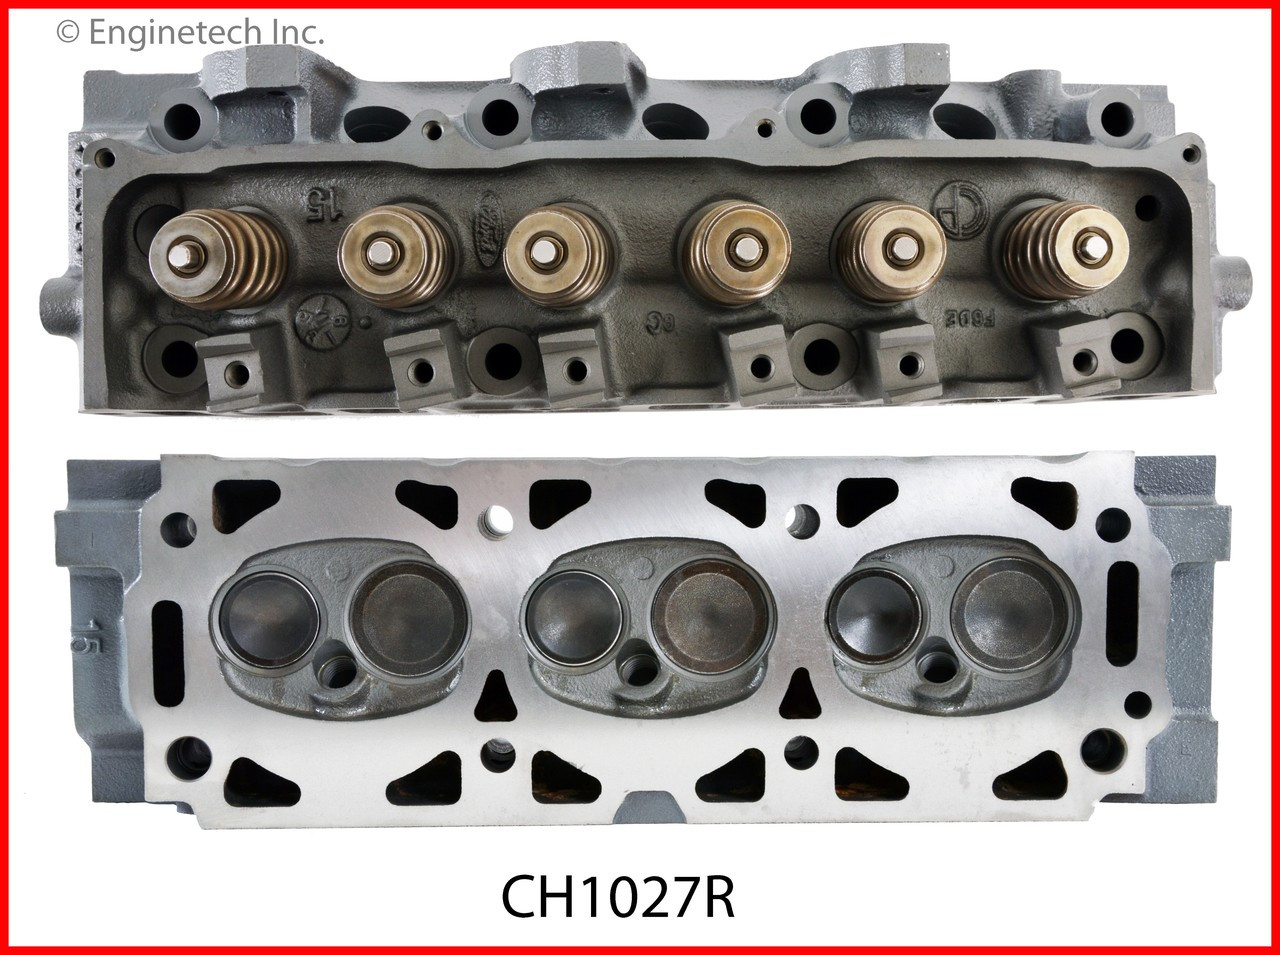 Cylinder Head Assembly - 2005 Ford Ranger 3.0L (CH1027R.D35)